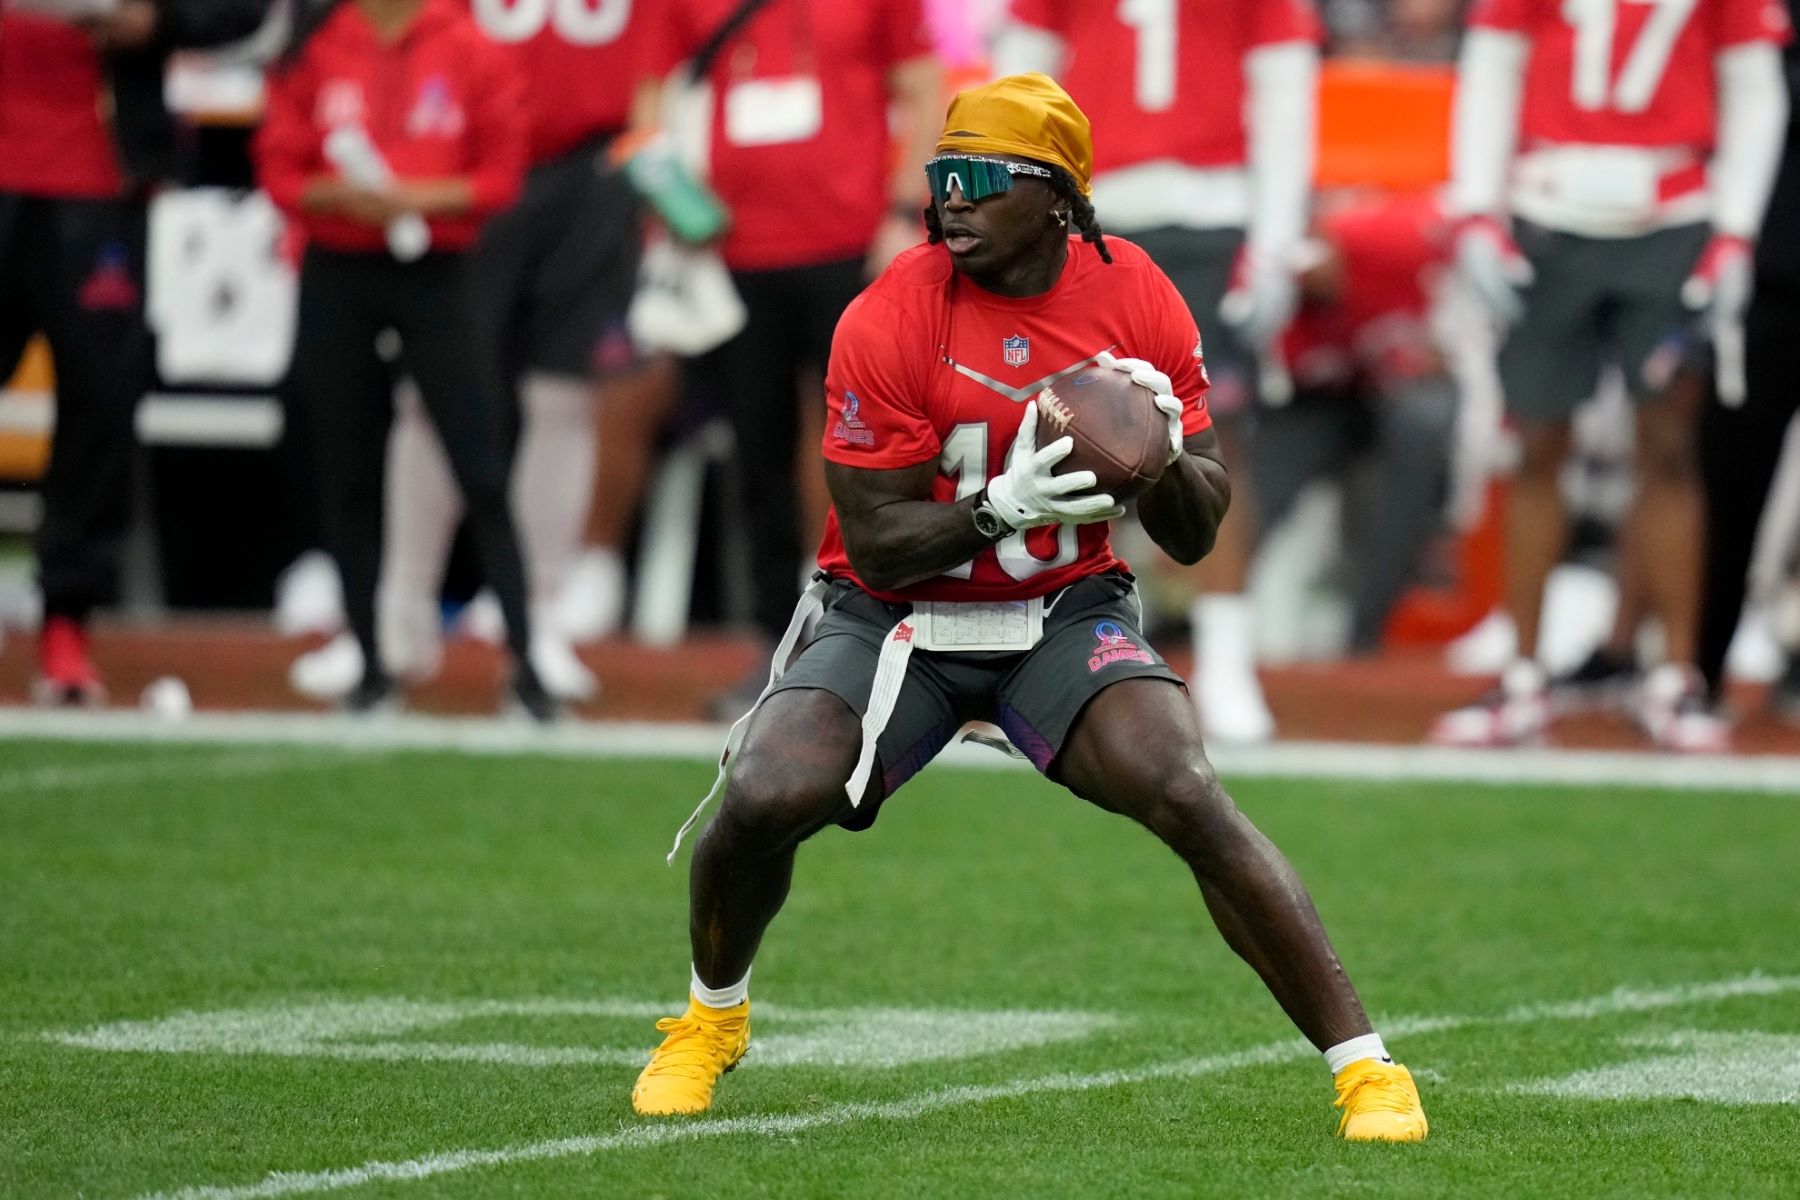 tyreek-hill-surprises-young-fan-mini-cheetah-who-went-viral-with-insane-runs-and-catch